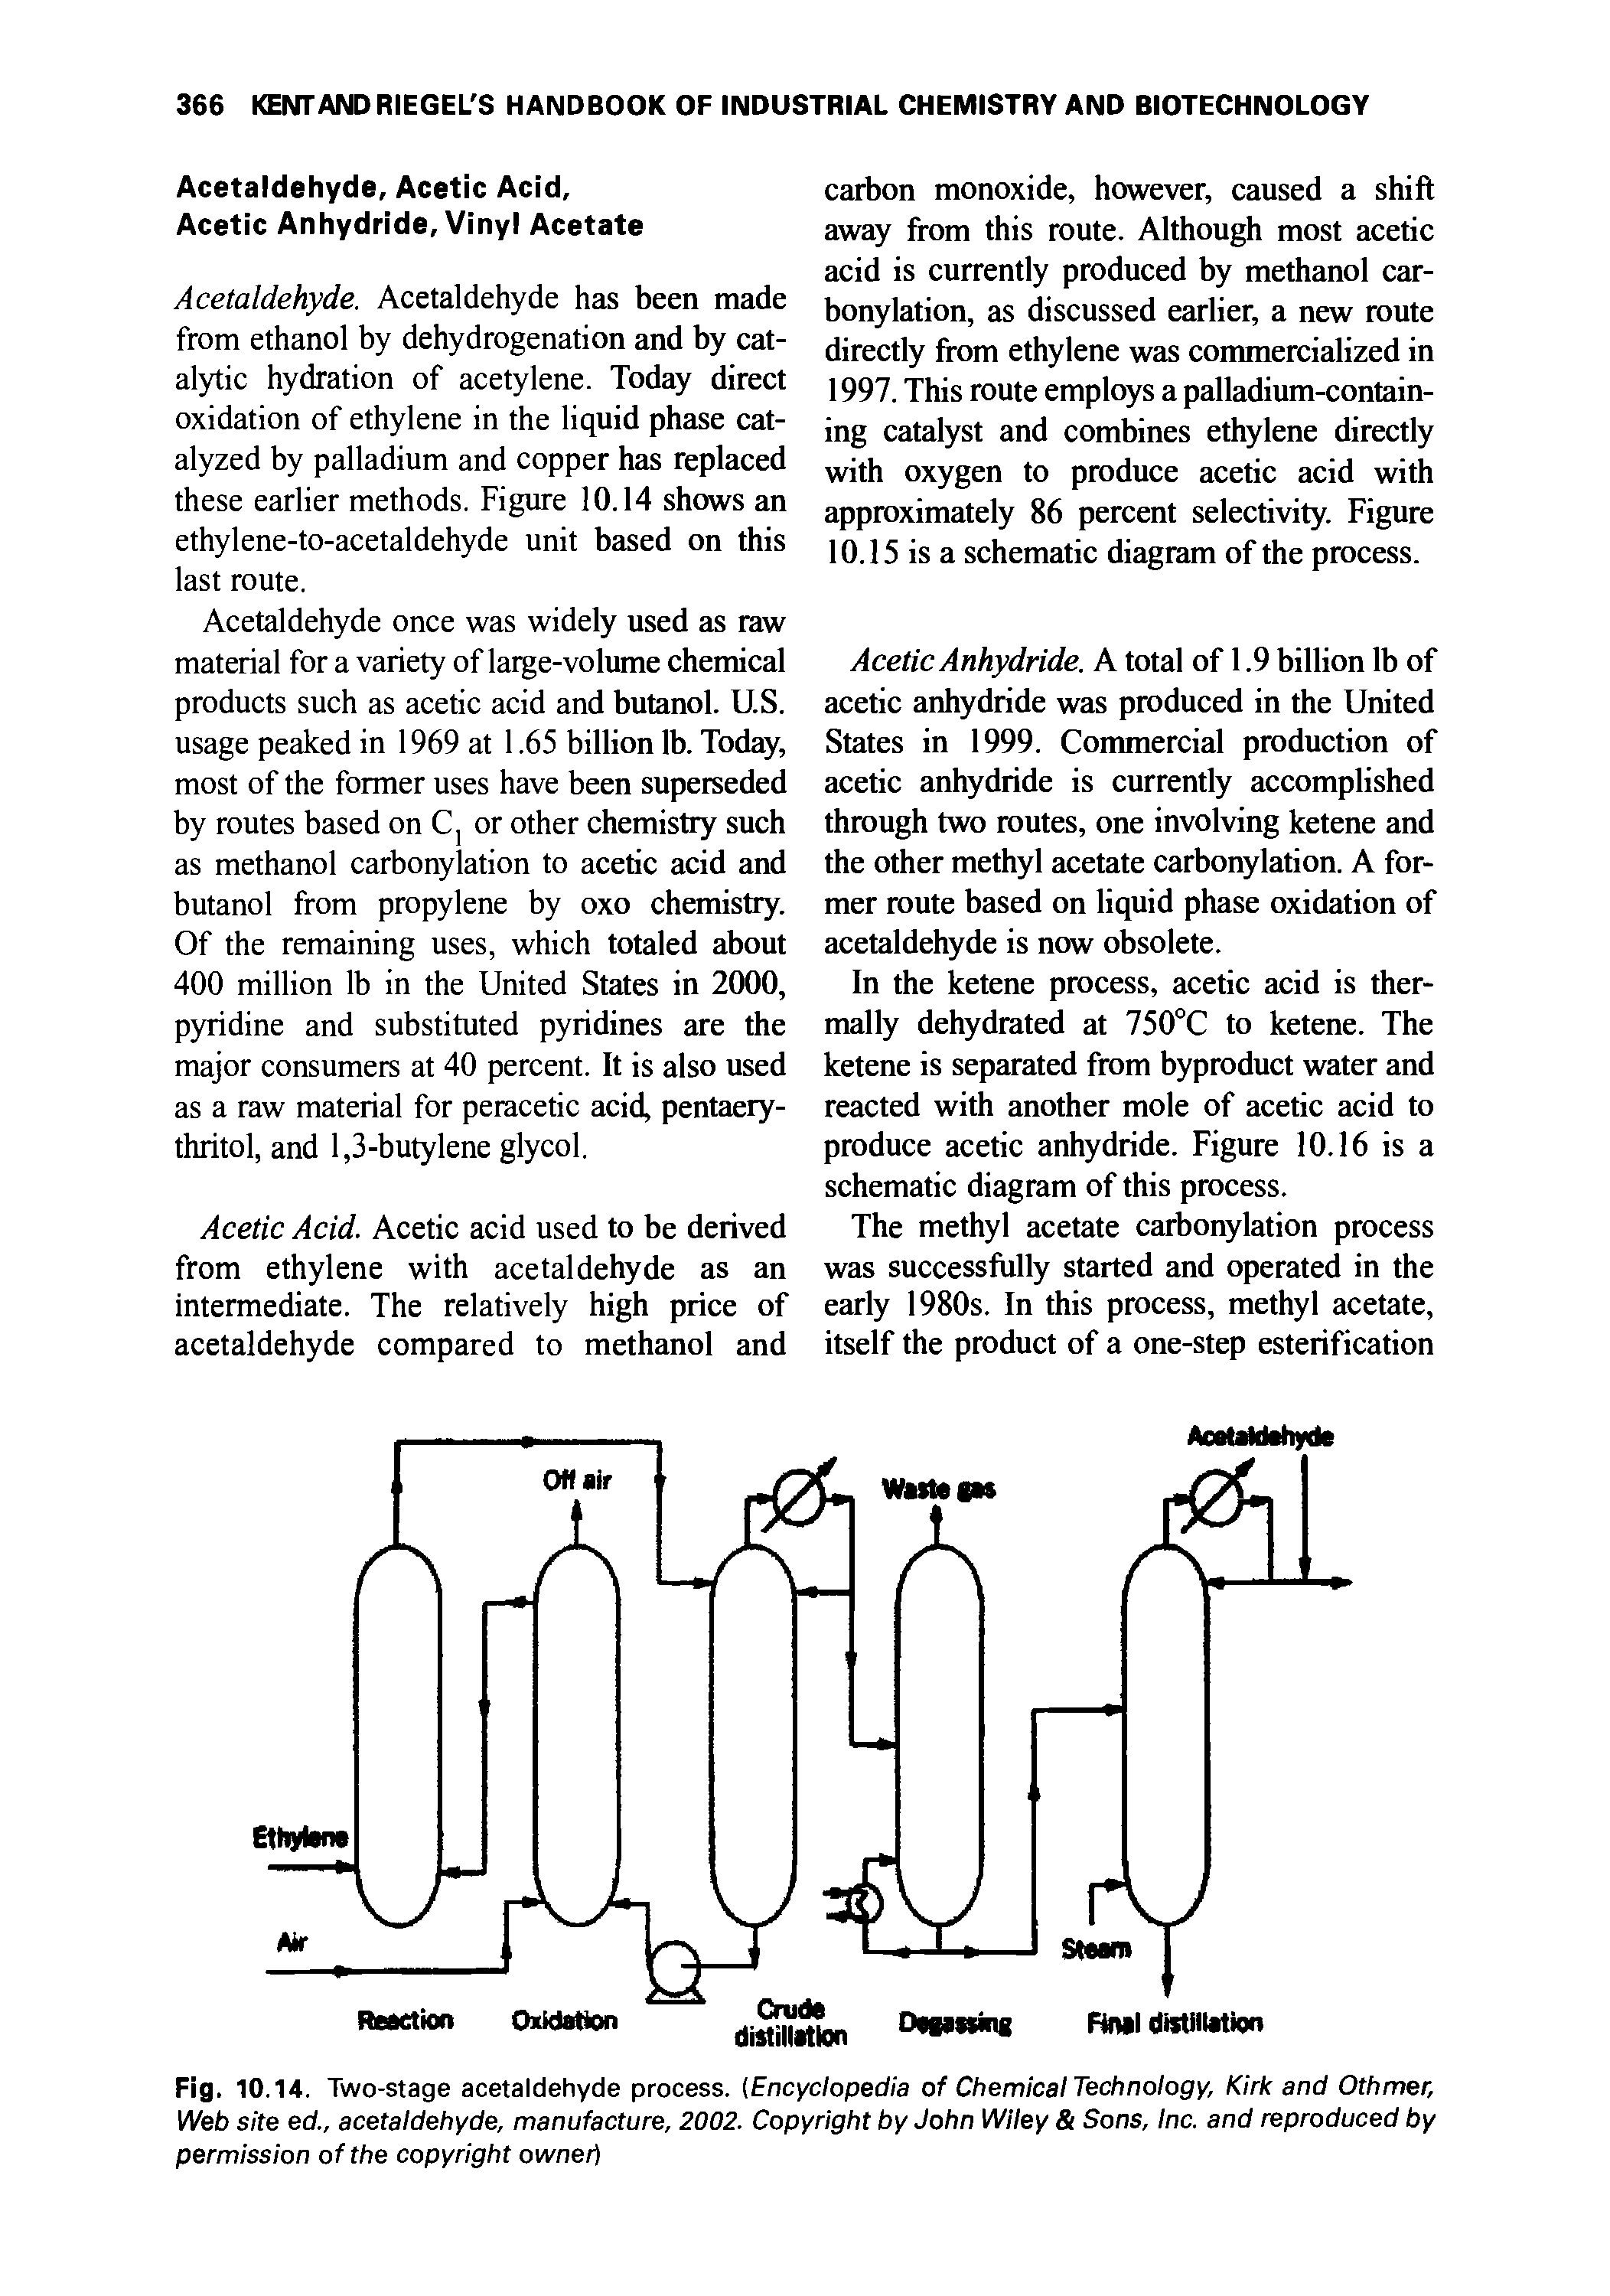 Fig. 10.14. Two-stage acetaldehyde process. (Encyclopedia of Chemical Technology, Kirk and Othmer, Web site ed., acetaldehyde, manufacture, 2002. Copyright by John Wiley Sons, Inc. and reproduced by permission of the copyright owned...